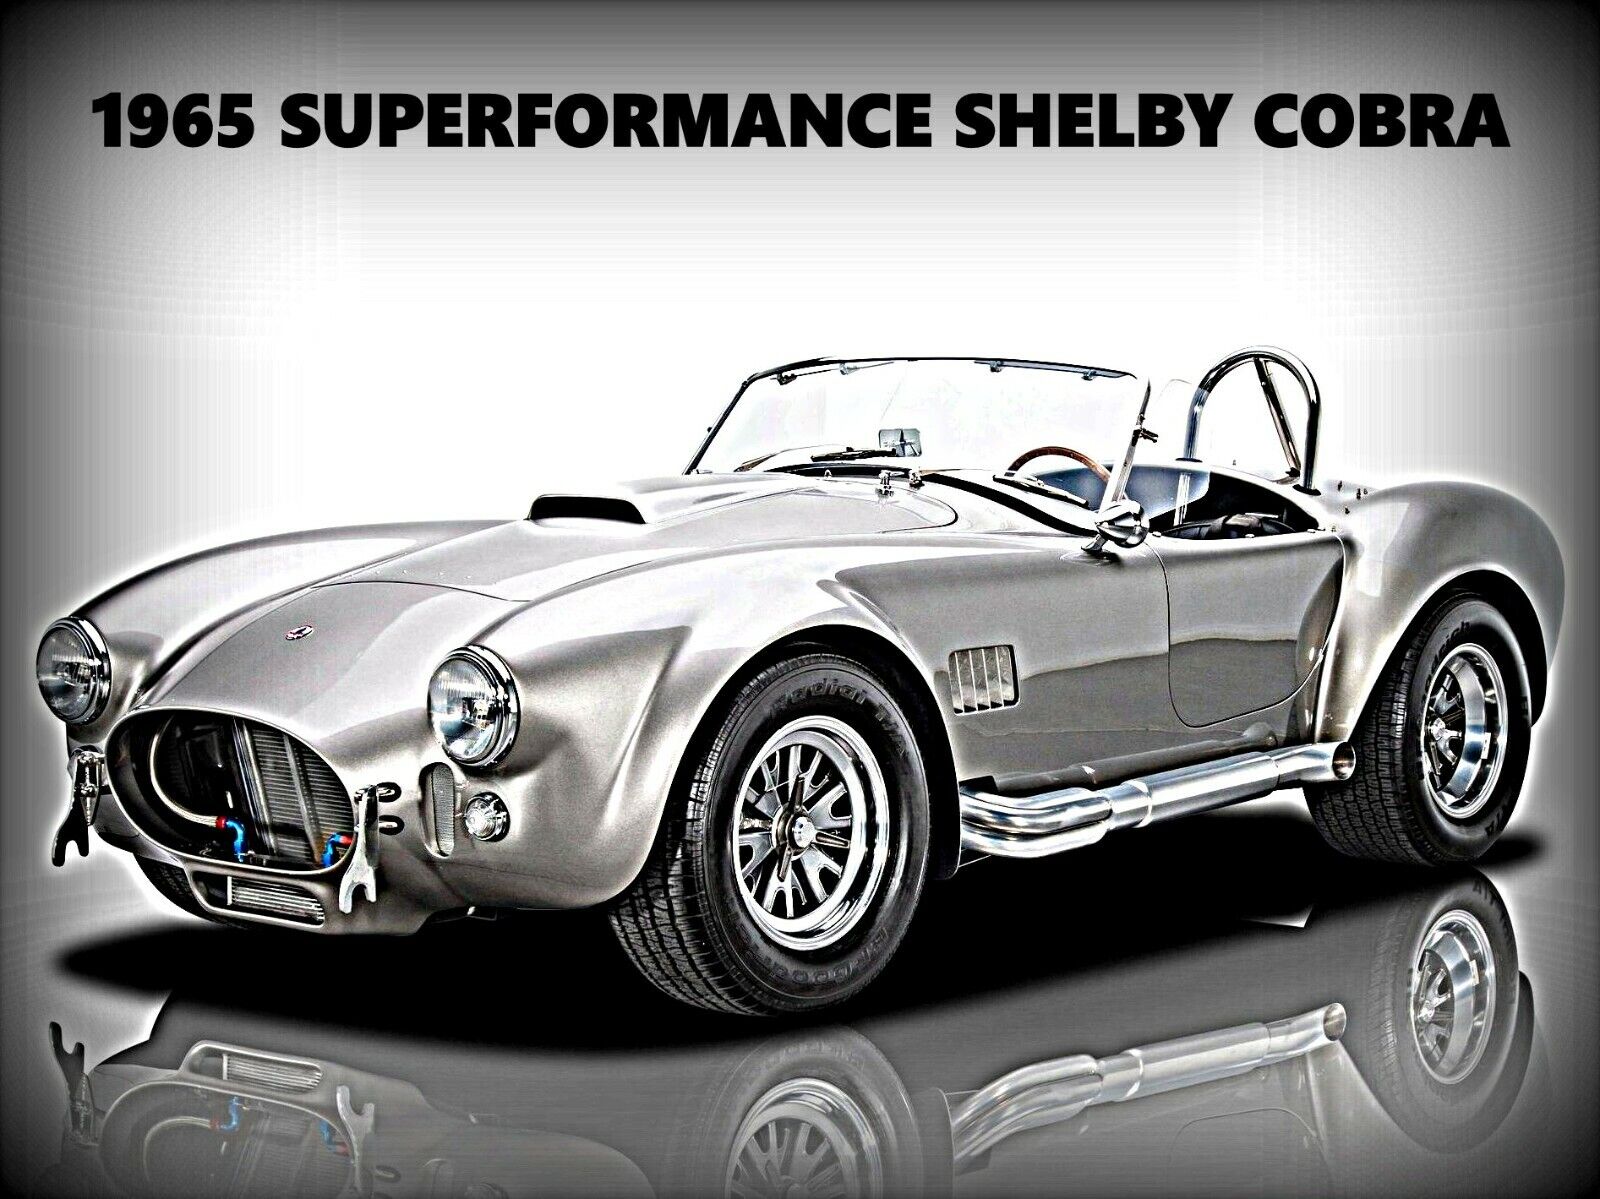 1965 Superformance Shelby Cobra  New Metal Sign: Classic Silver Color